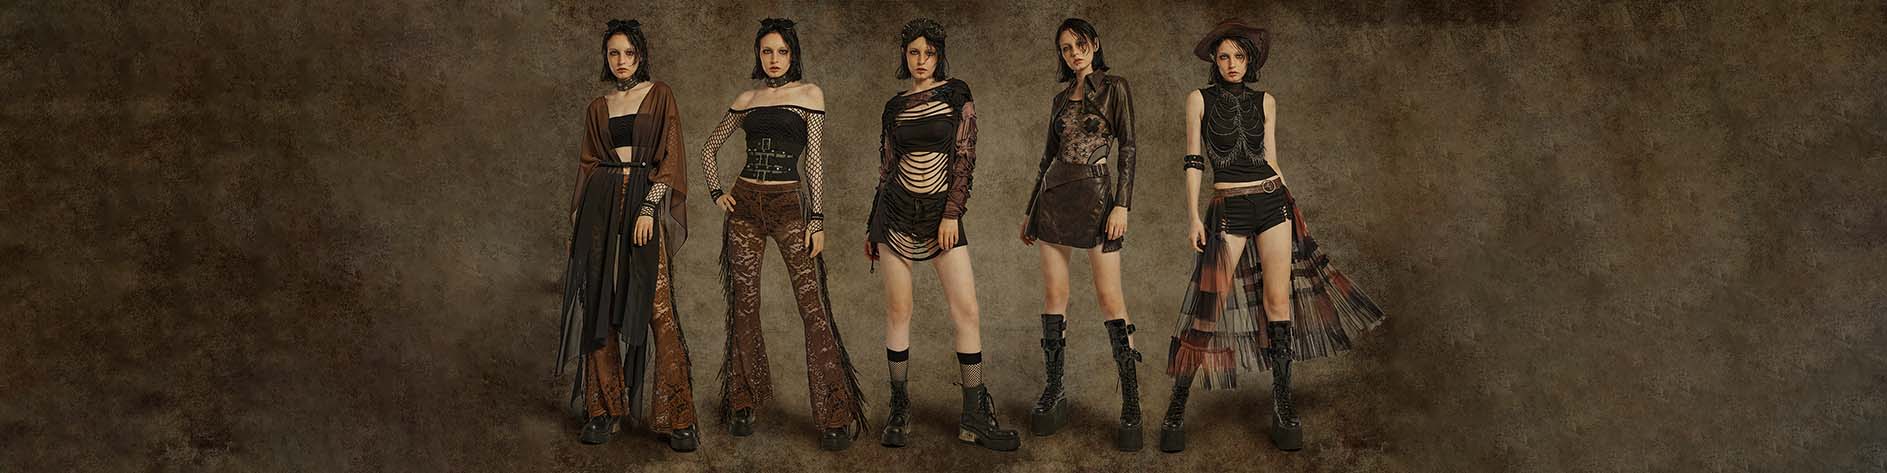 How Can You Style A Goth Dress for Different Occasions?